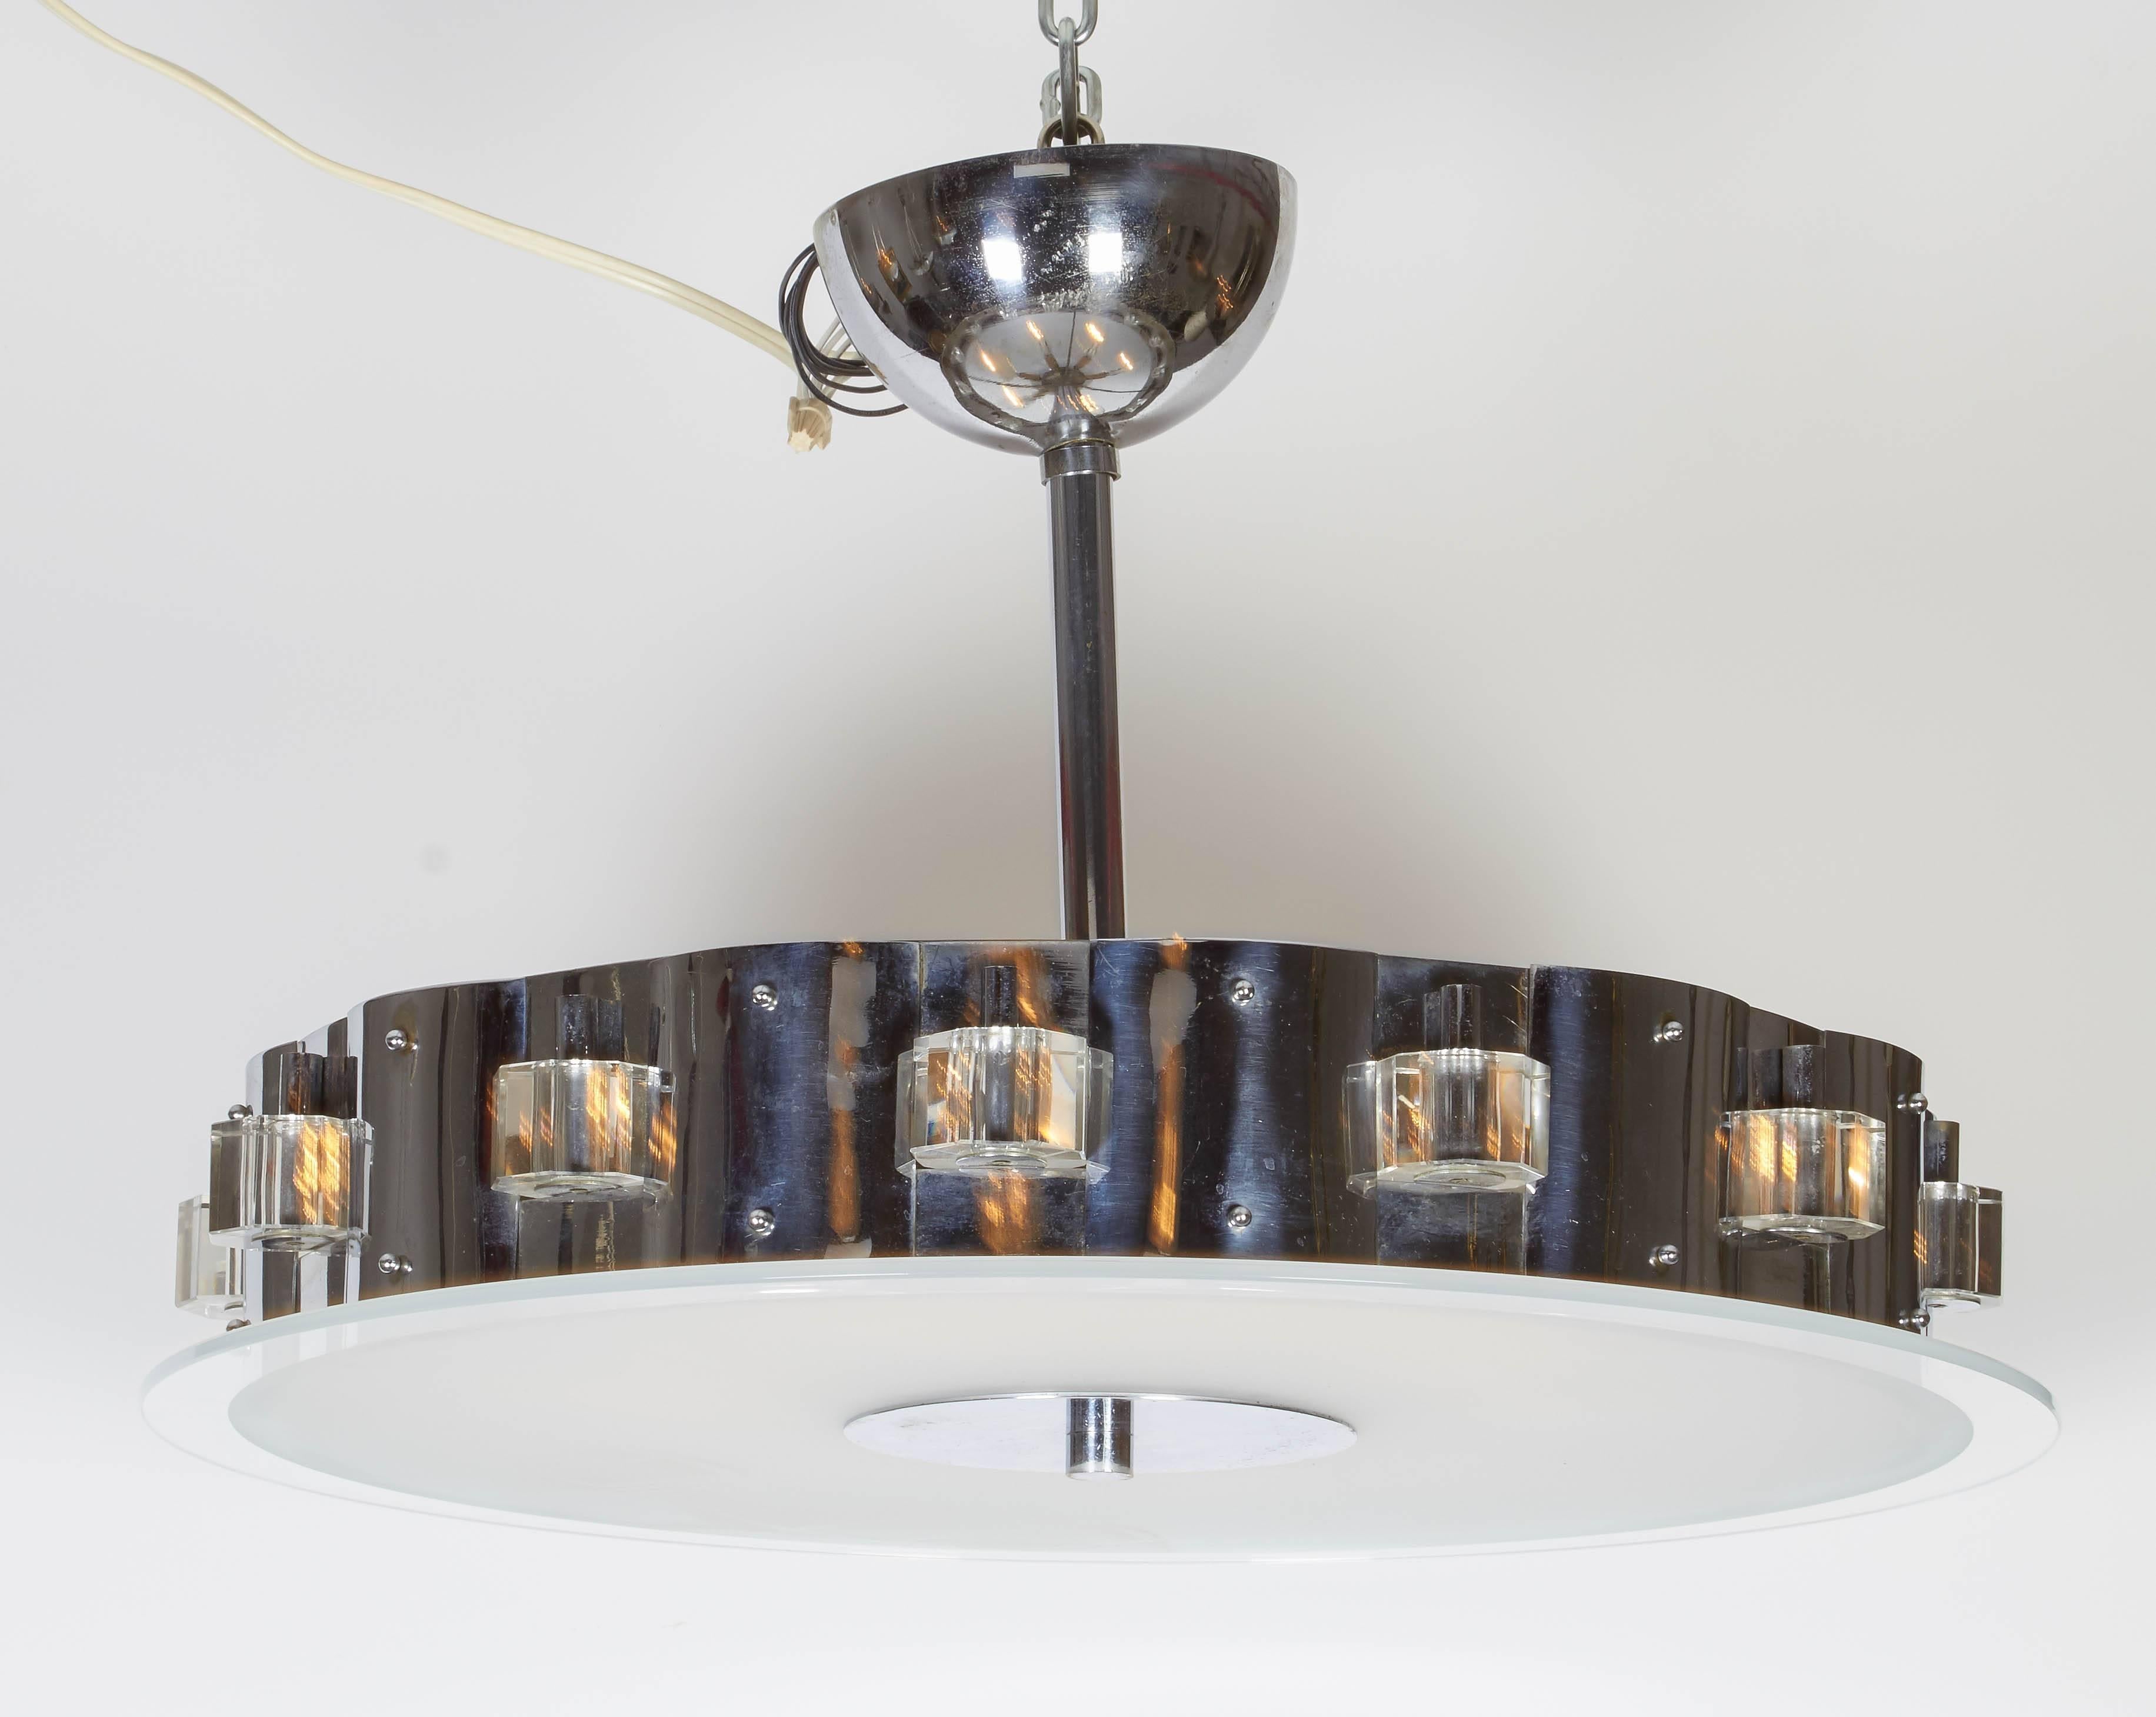 Art Deco chandelier, made of nickel-plated brass decorated with cut-glass inserts, and a clear and frosted bottom plate.
Measures: Height 18